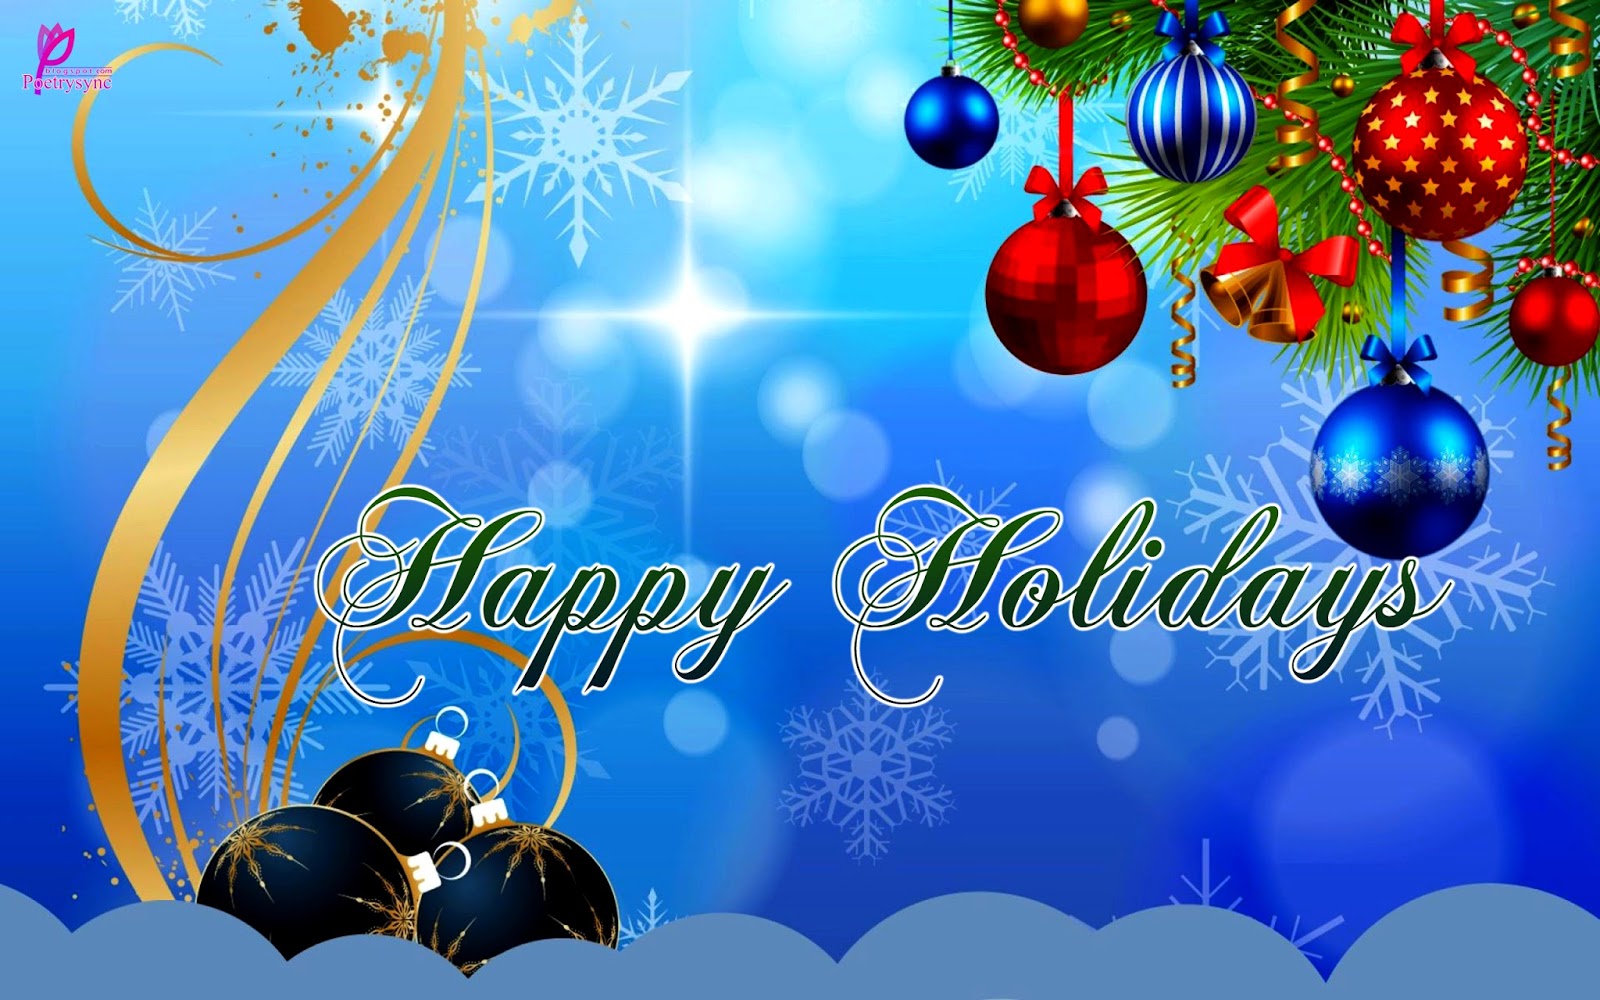 Happy Holidays Blue Greetings And Wishes Card Wallpaper New Year